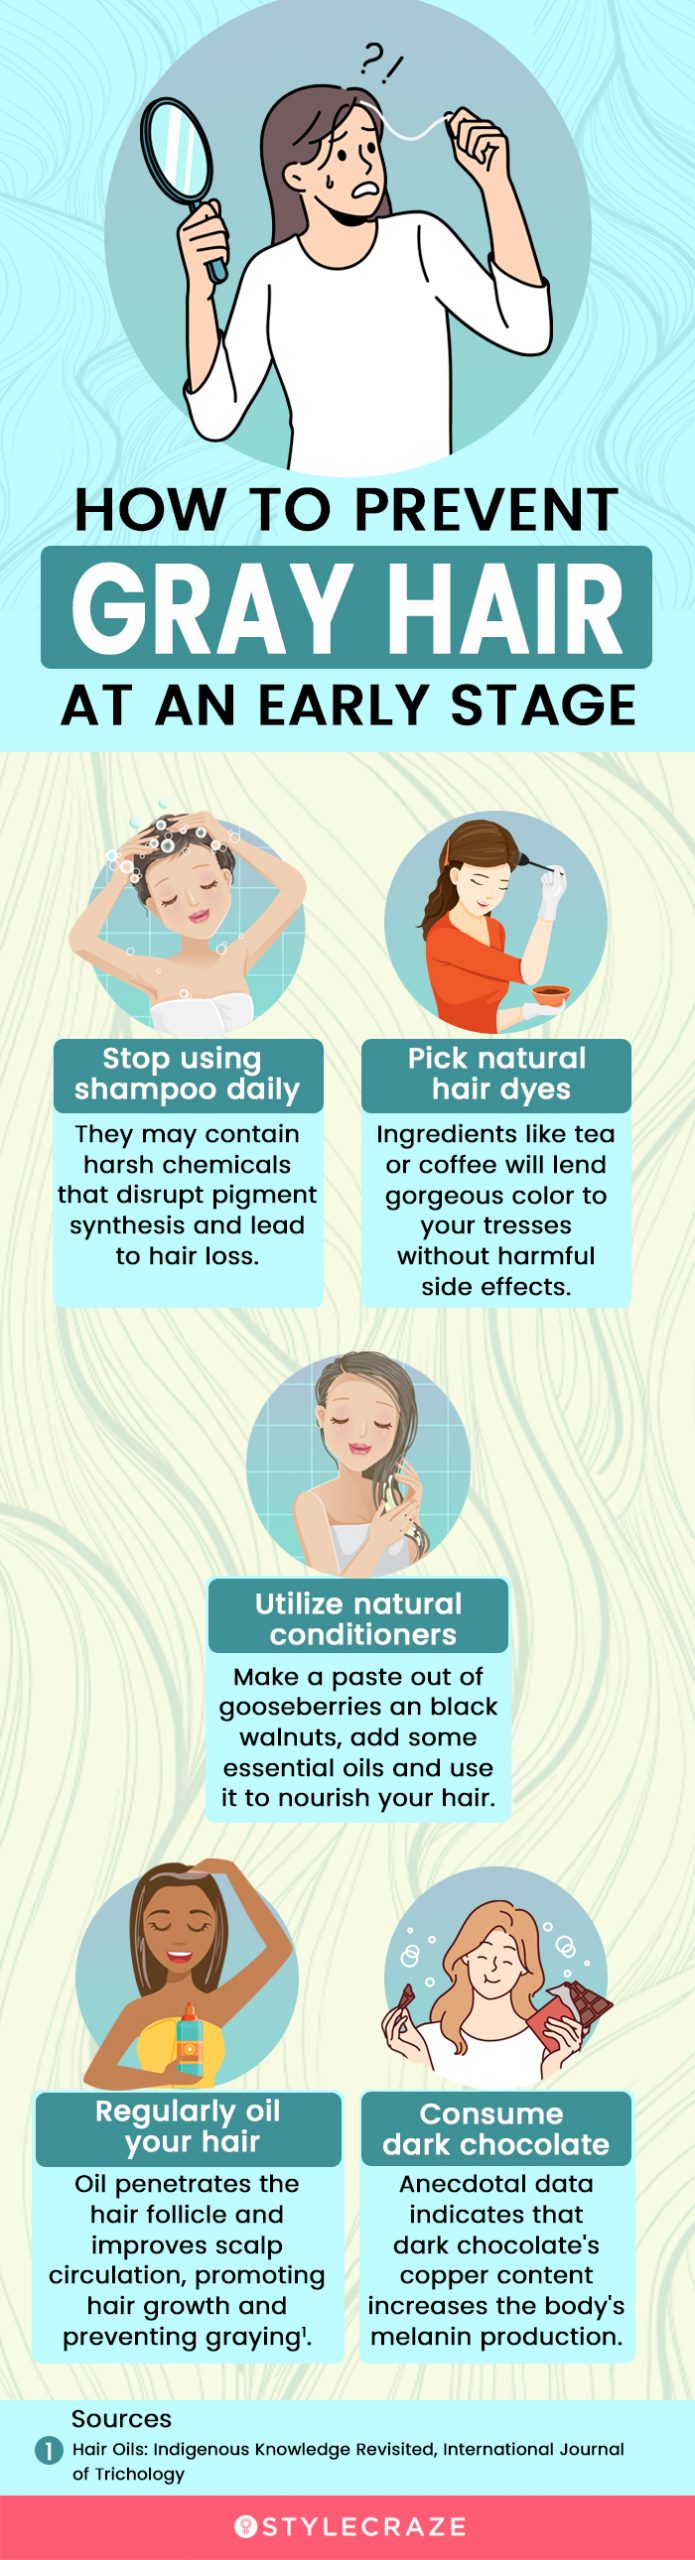 Top 10 Home Remedies For Premature Greying Of Hair » CashKaro Blog